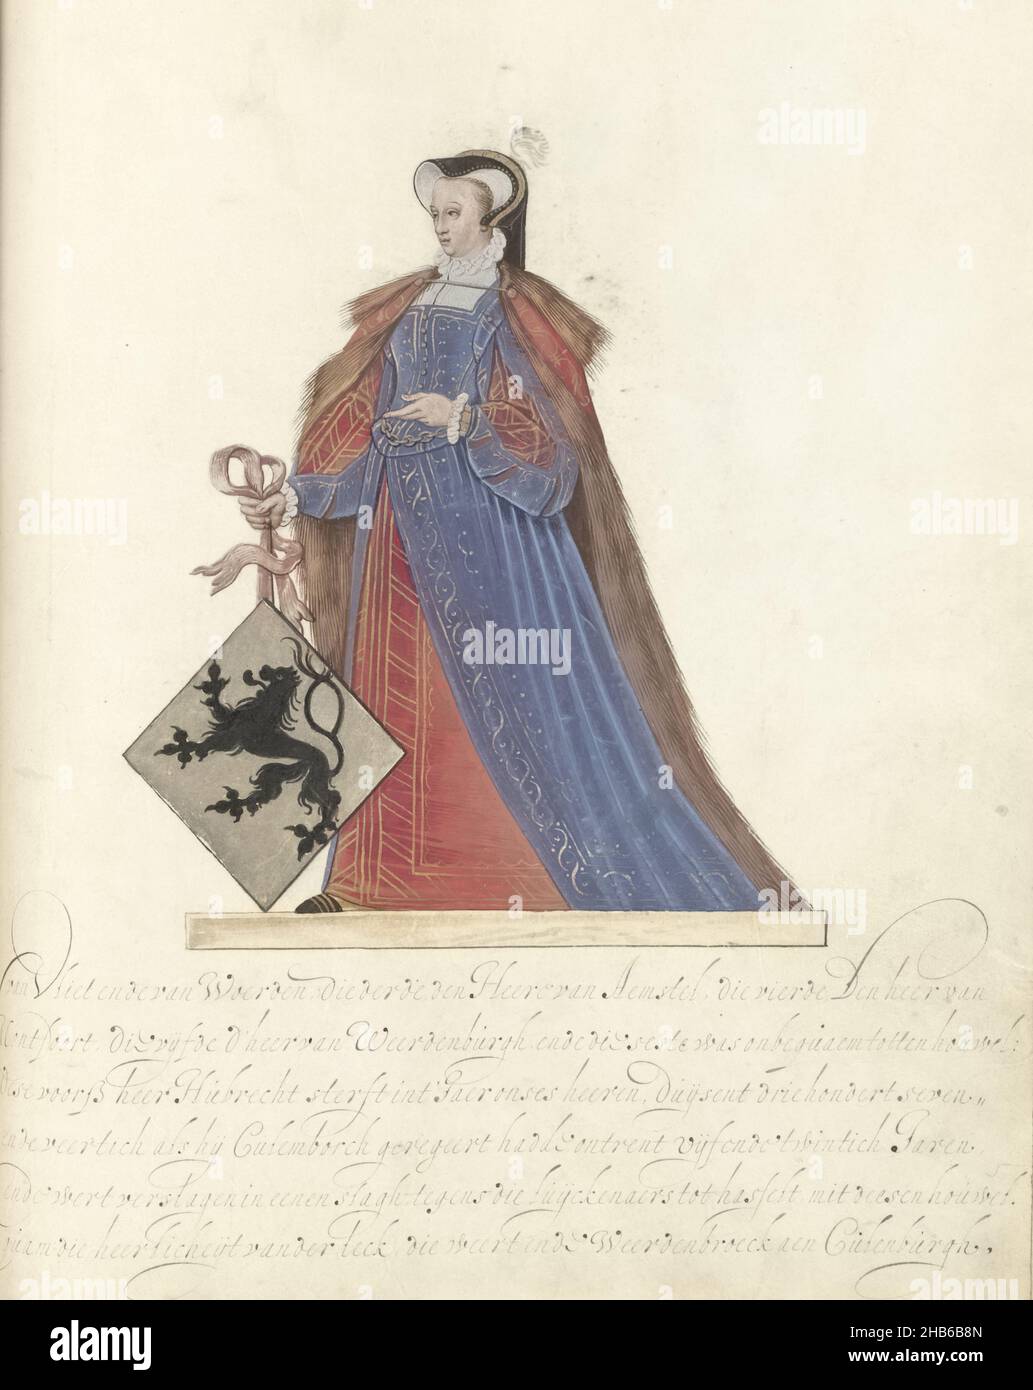 Jutta van der Leck, lady of Culemborg, Jutta van der Leck, lady of Culemborg. Wife of Hubrecht IV, lord of Culemborg. Standing full-length with the coat of arms of the Van der Leck family. Part of an illustrated manuscript containing the genealogy of the lords and counts of Culemborg., draughtsman: Nicolaes de Kemp (attributed to), anonymous, Northern Netherlands, c. 1590 - c. 1593 and/or c. 1600 - c. 1625, parchment (animal material), ink, painting, writing (processes), height 398 mm × width 292 mm Stock Photo